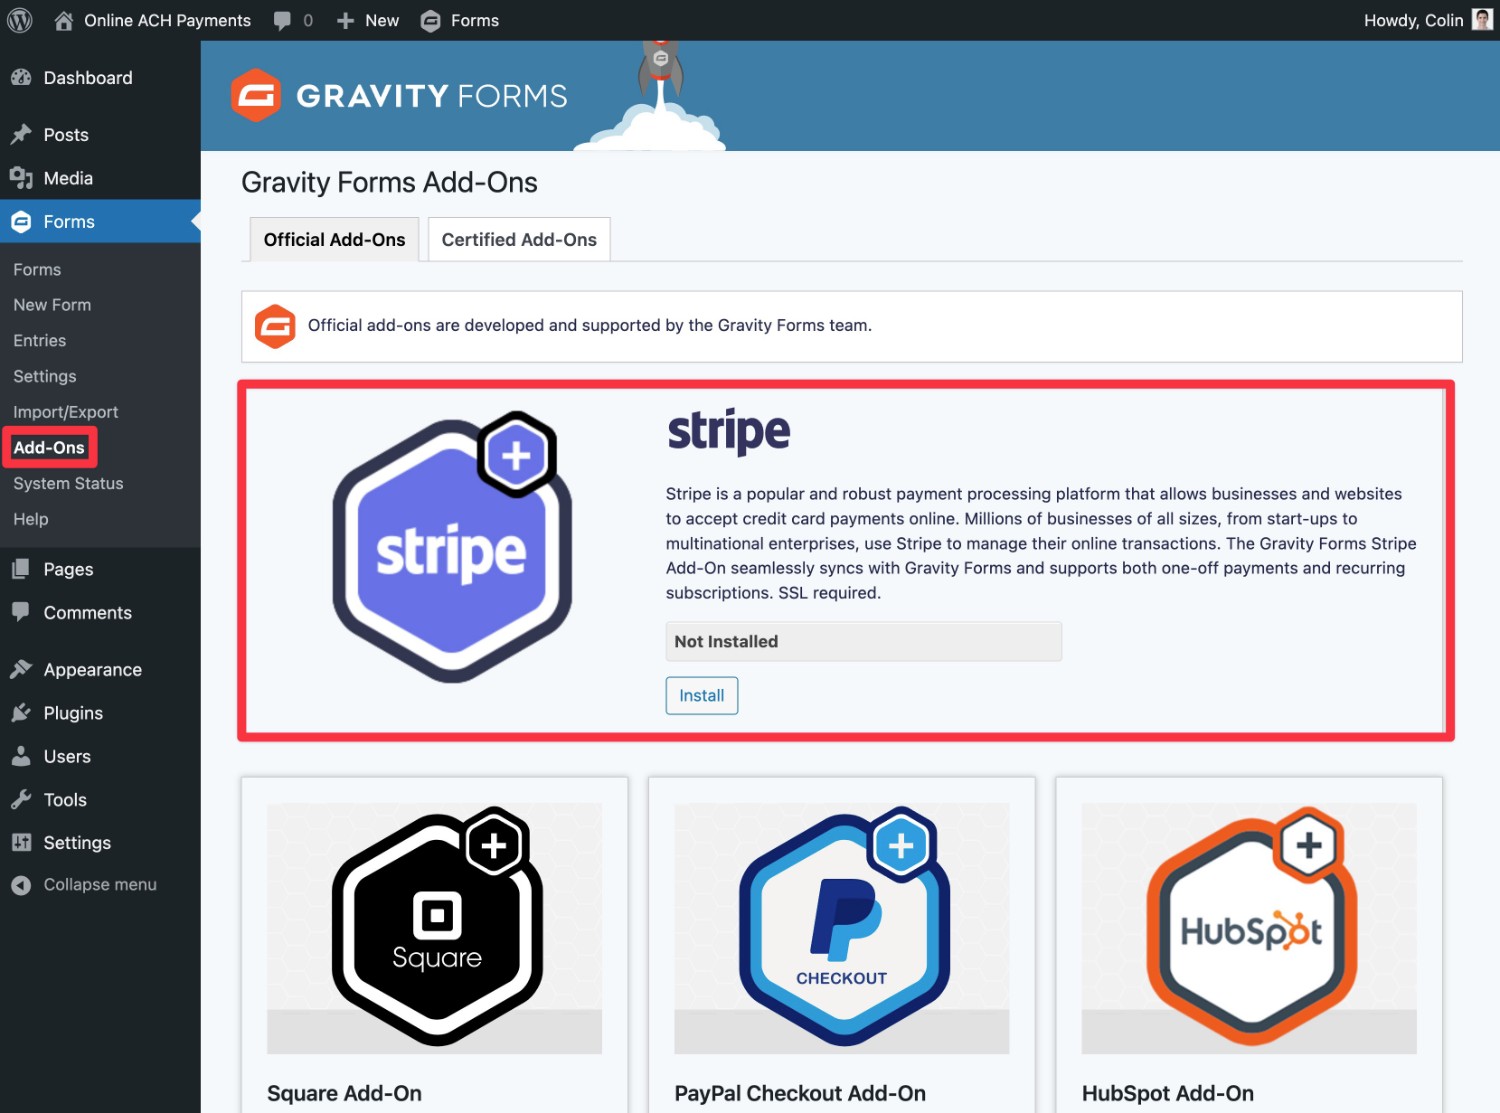 Install the Gravity Forms Stripe add-on to accept ACH payments online